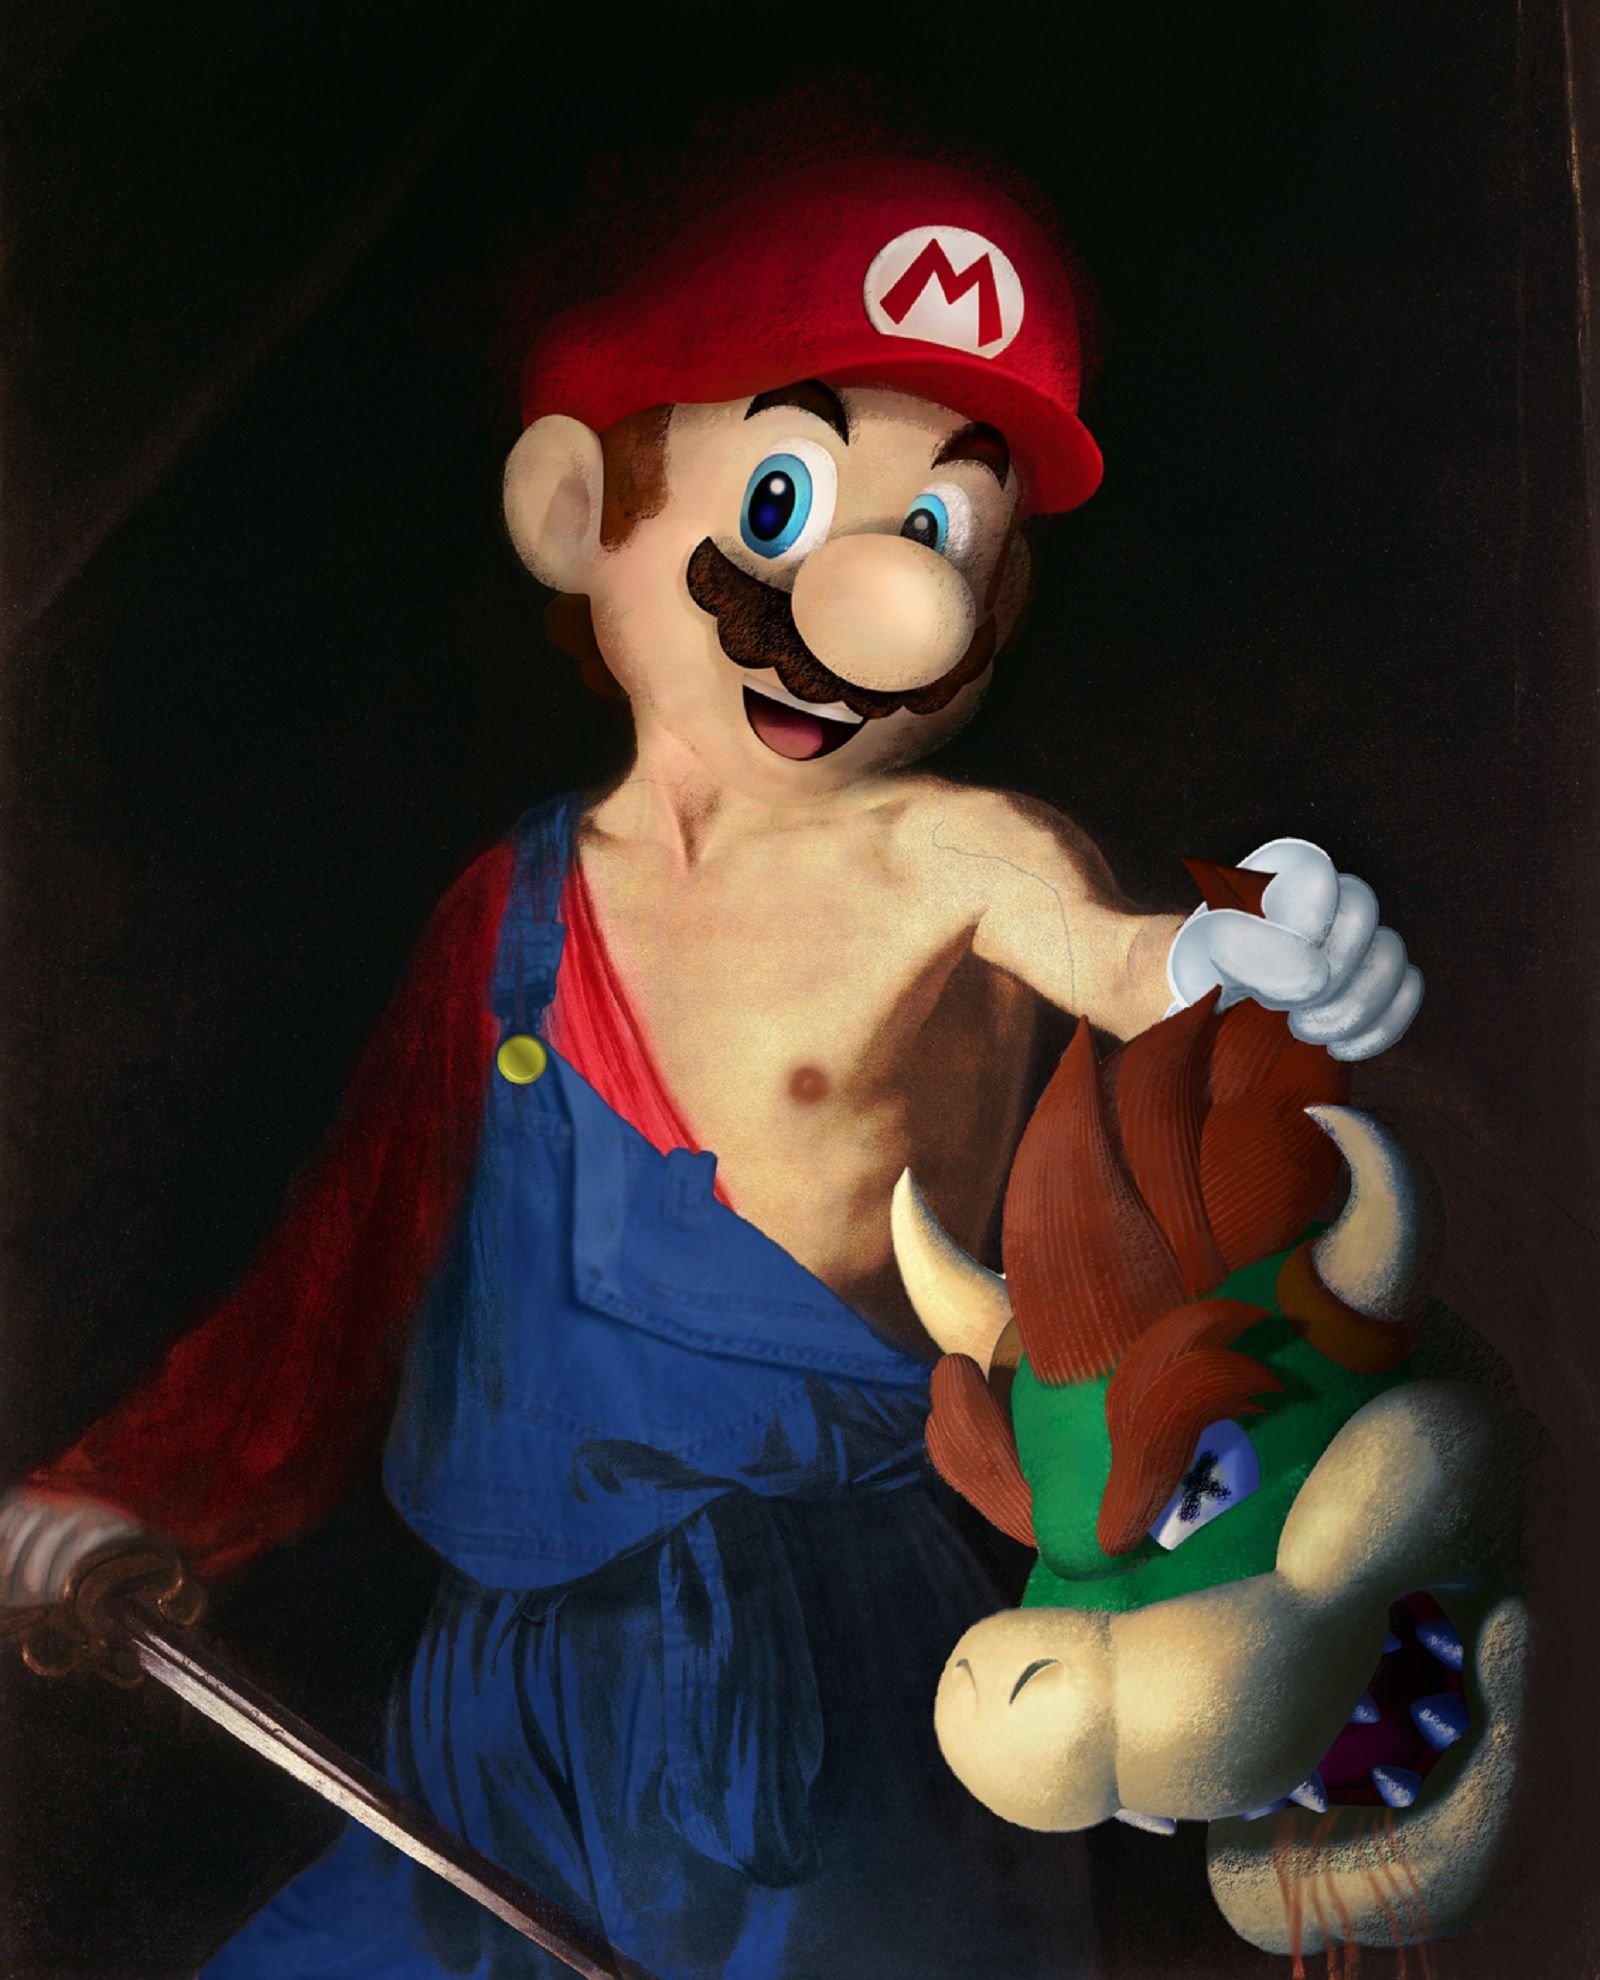 Amusing Images Of Cartoon Characters In Photoshopped Into Renaissance Paintings photo 11